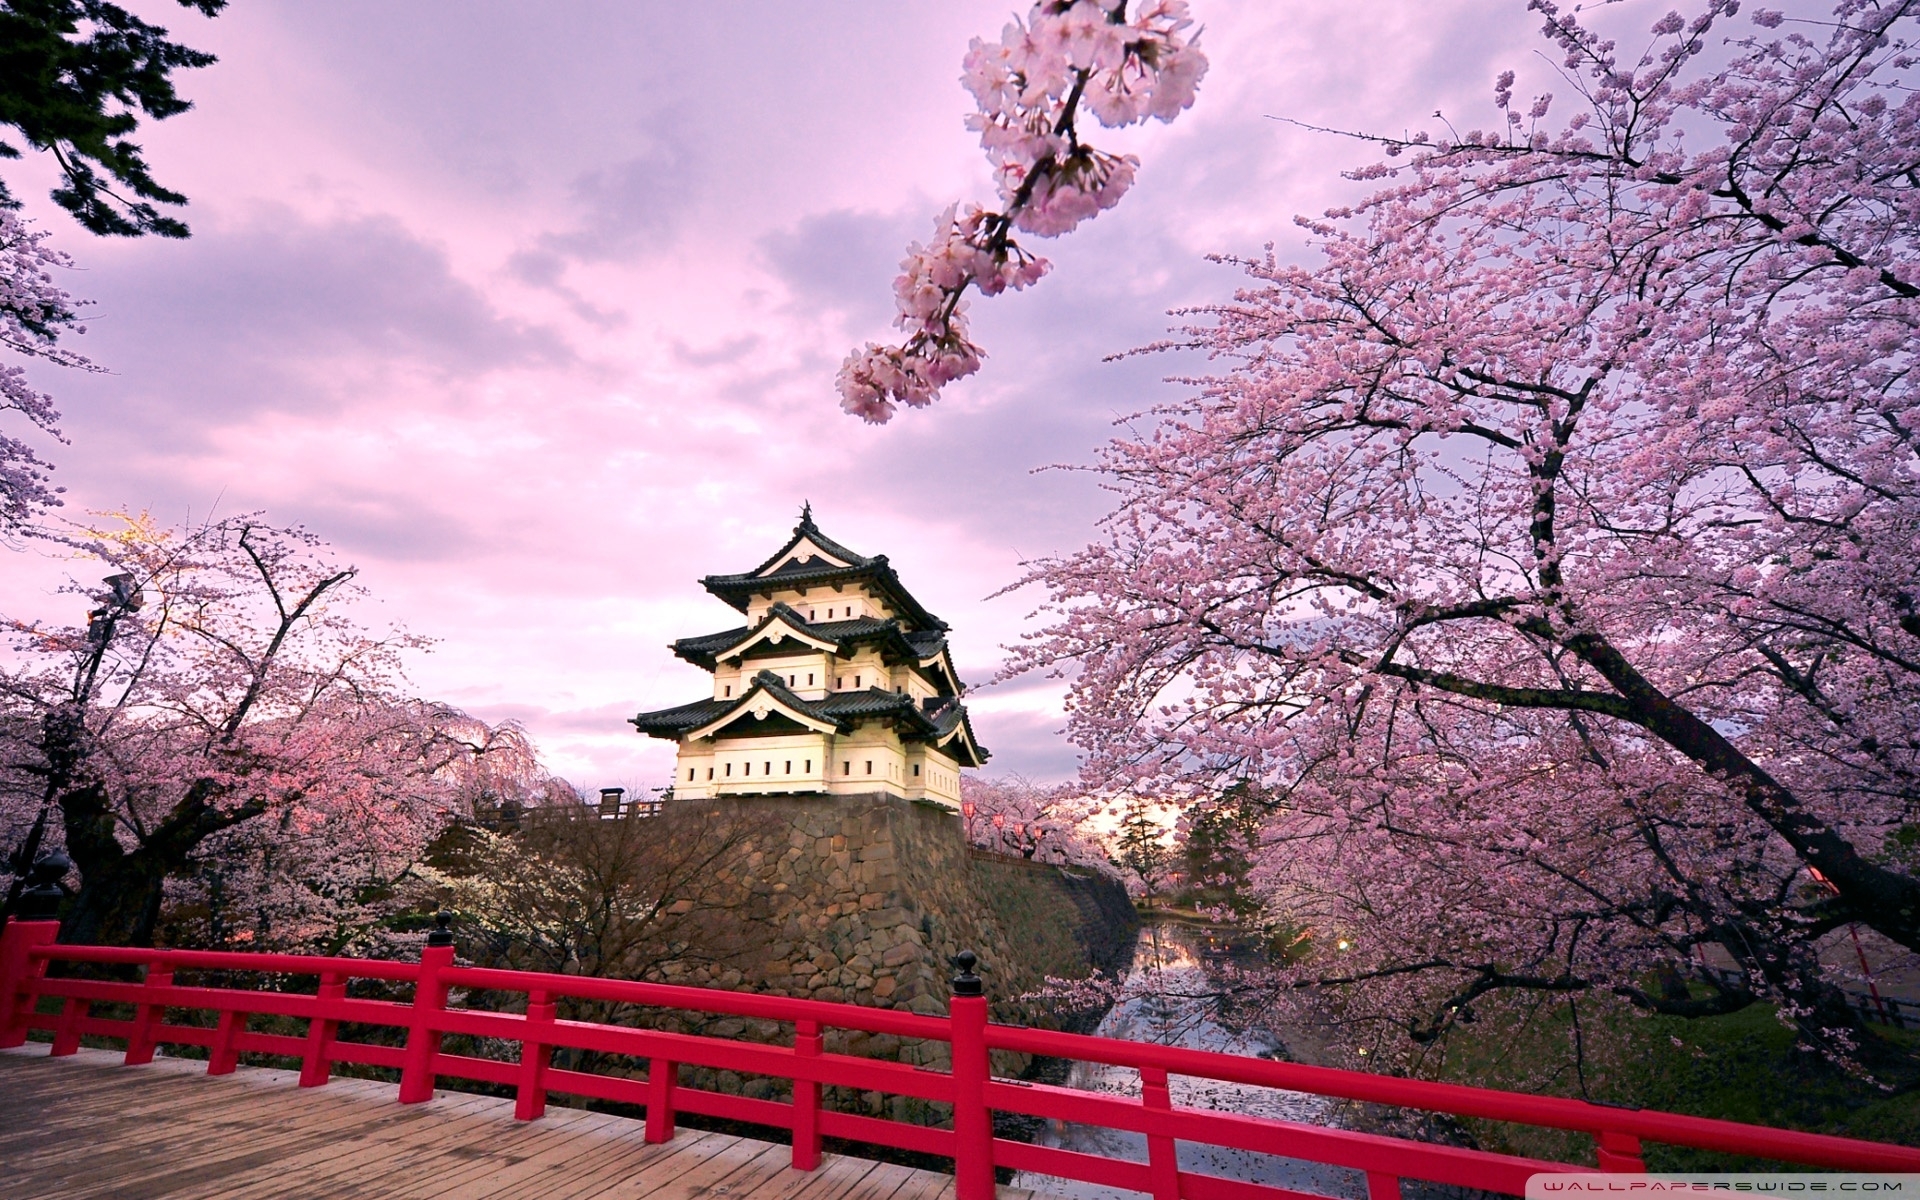 10 Latest Japan Cherry Blossom Wallpaper Hd FULL HD 1080p For PC Background